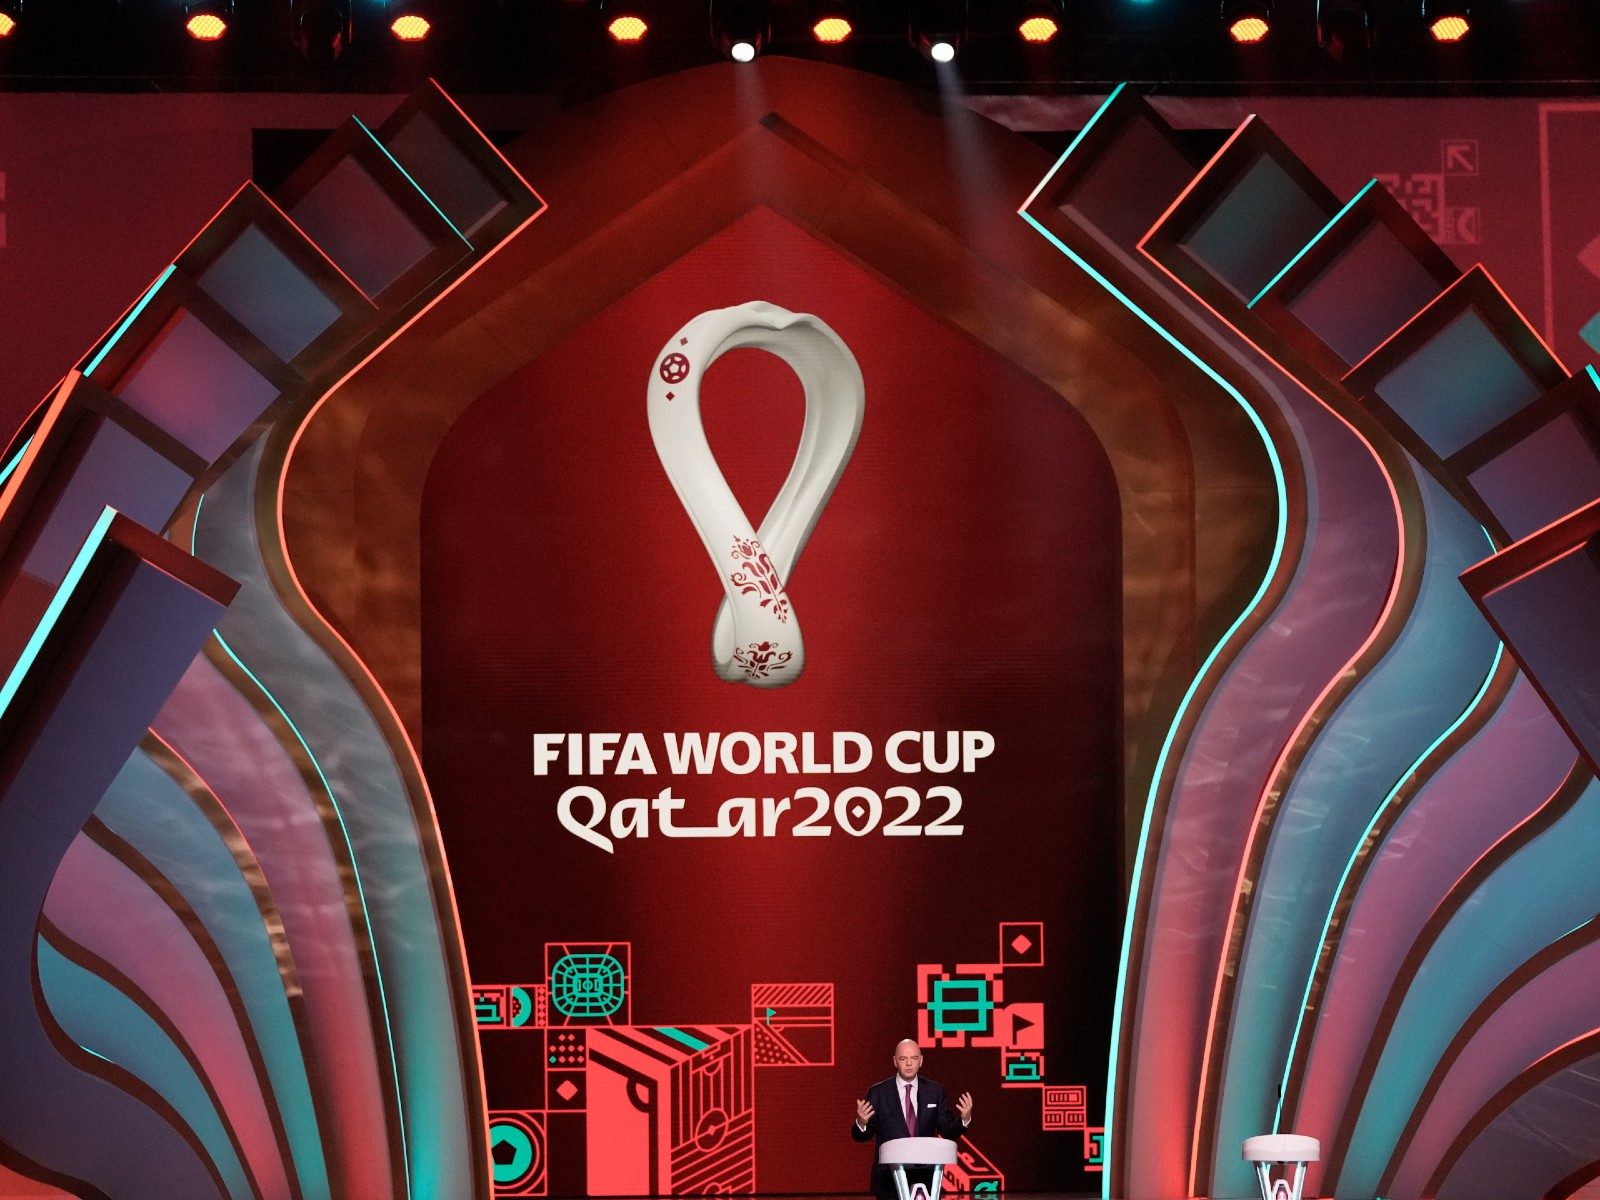 FIFA World Cup 2022 Draw Highlights: Spain and Germany in Same Group for  Qatar Showpiece - News18